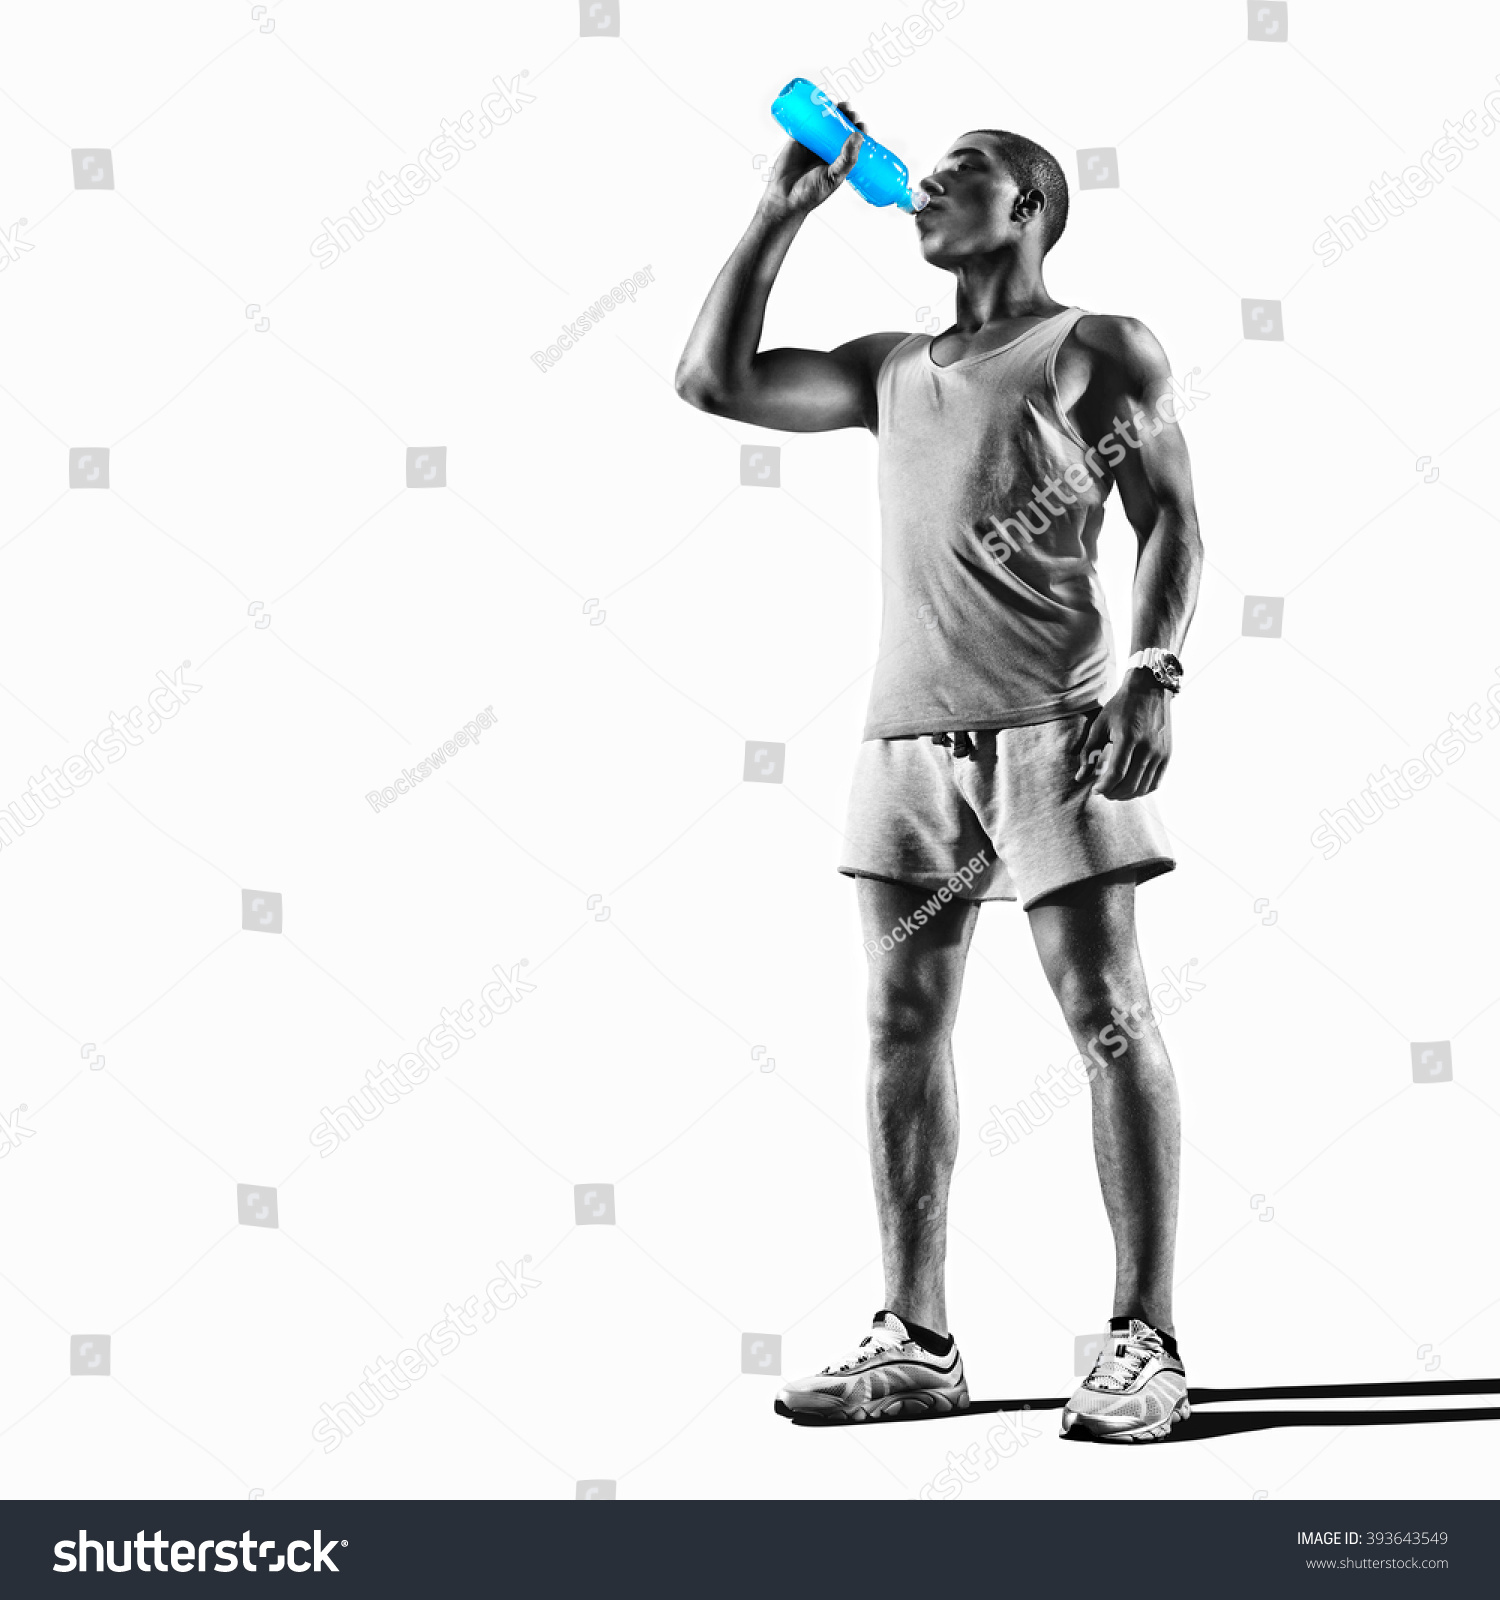 Young muscular build man silhouette drinking water of bottle after running, attractive athlete resting after workout outdoors, fitness and healthy lifestyle concept. Isolated on white #393643549